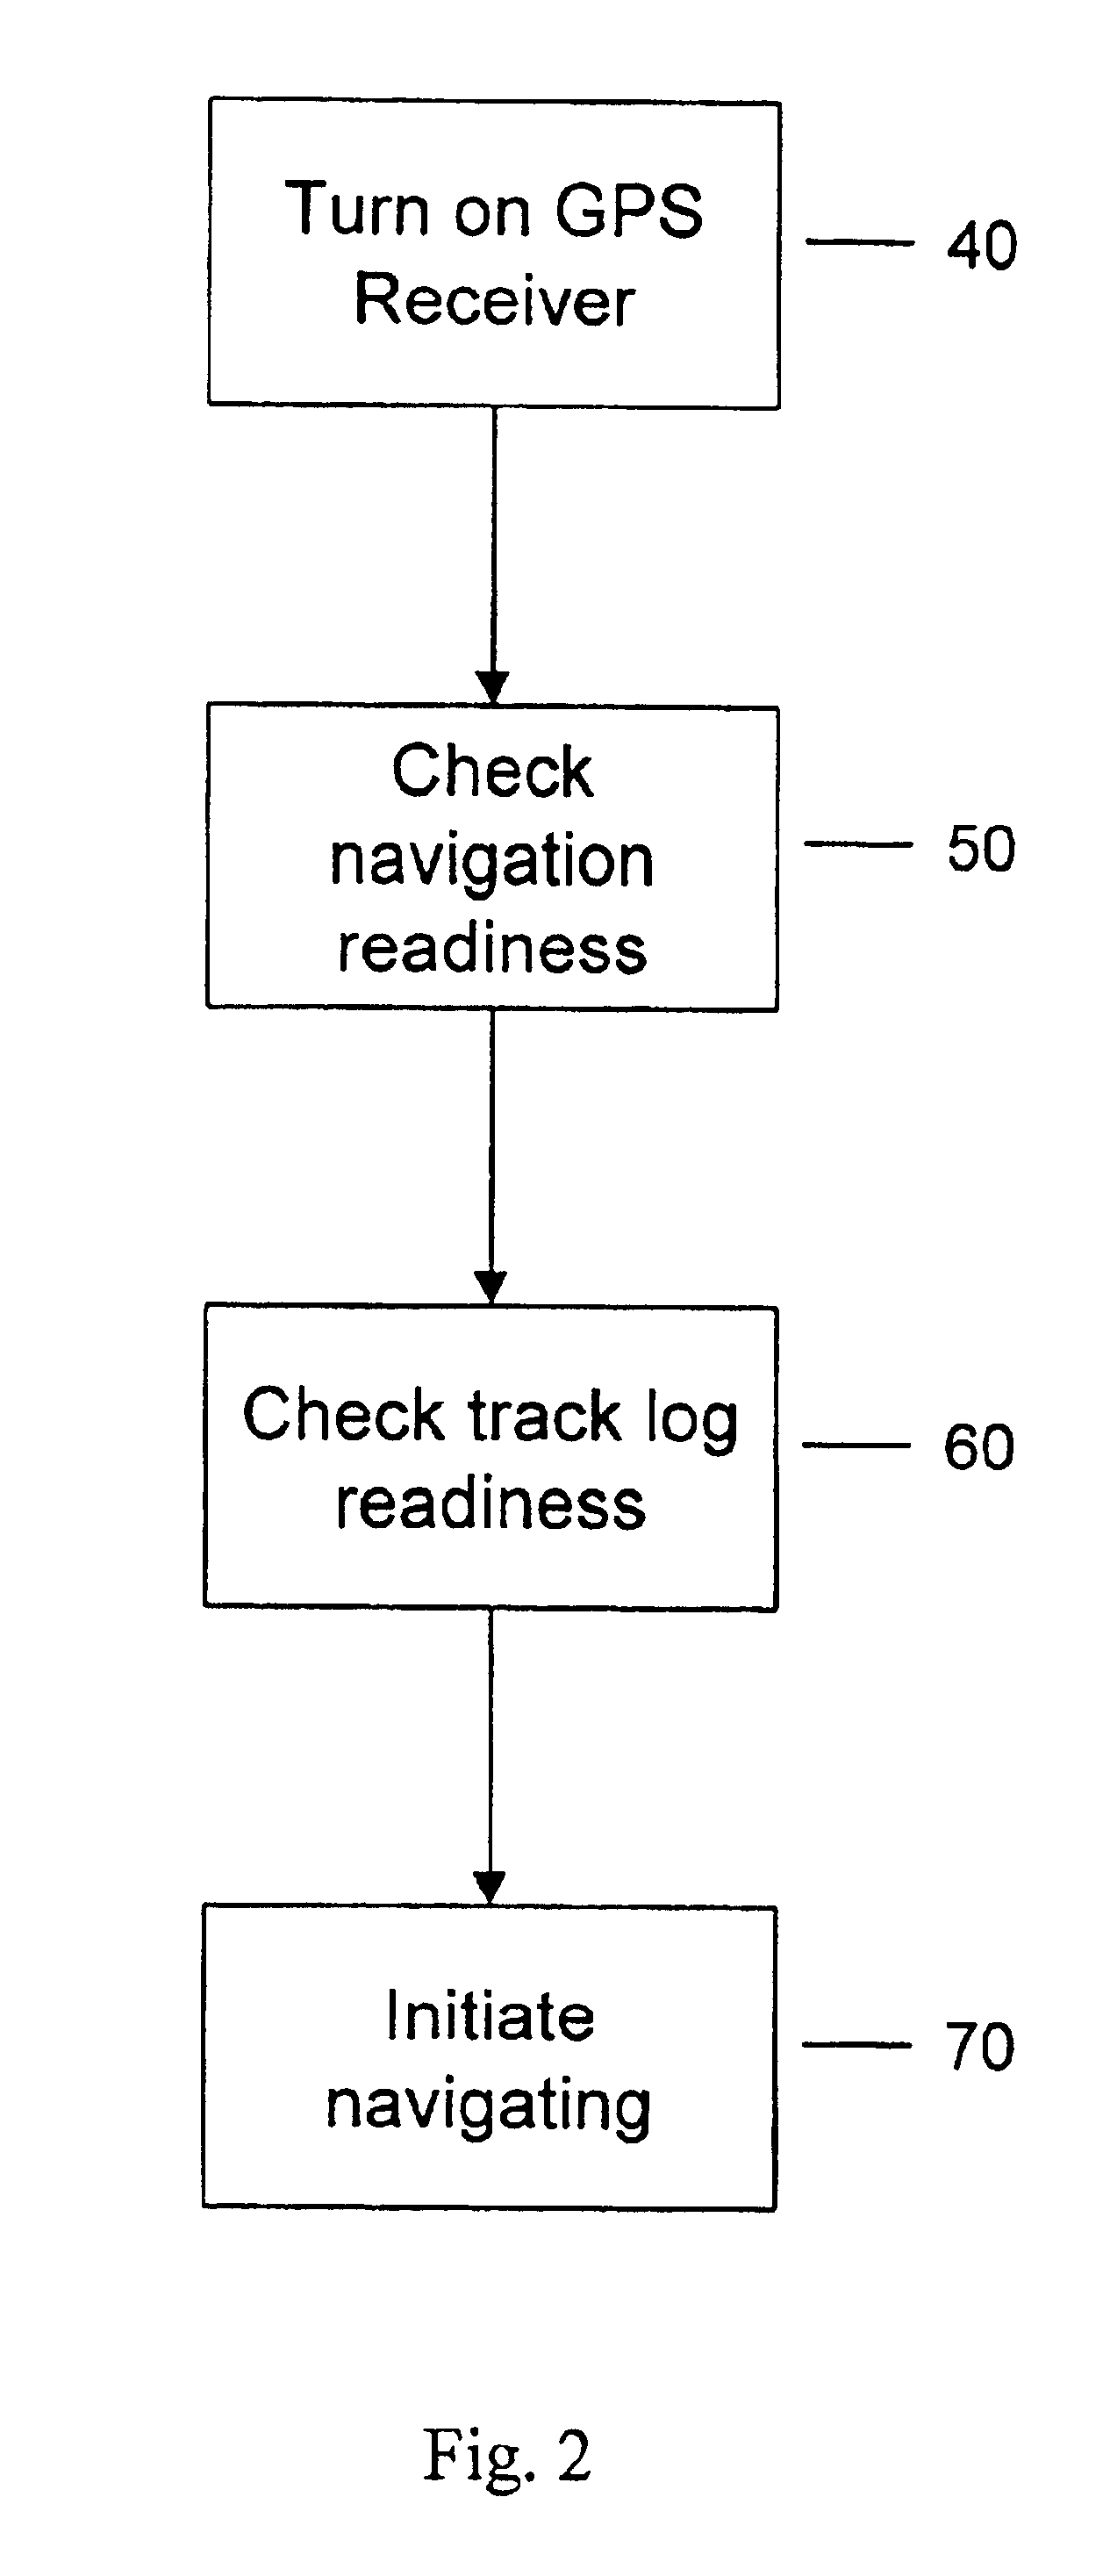 Method for matching geographic information with recorded images